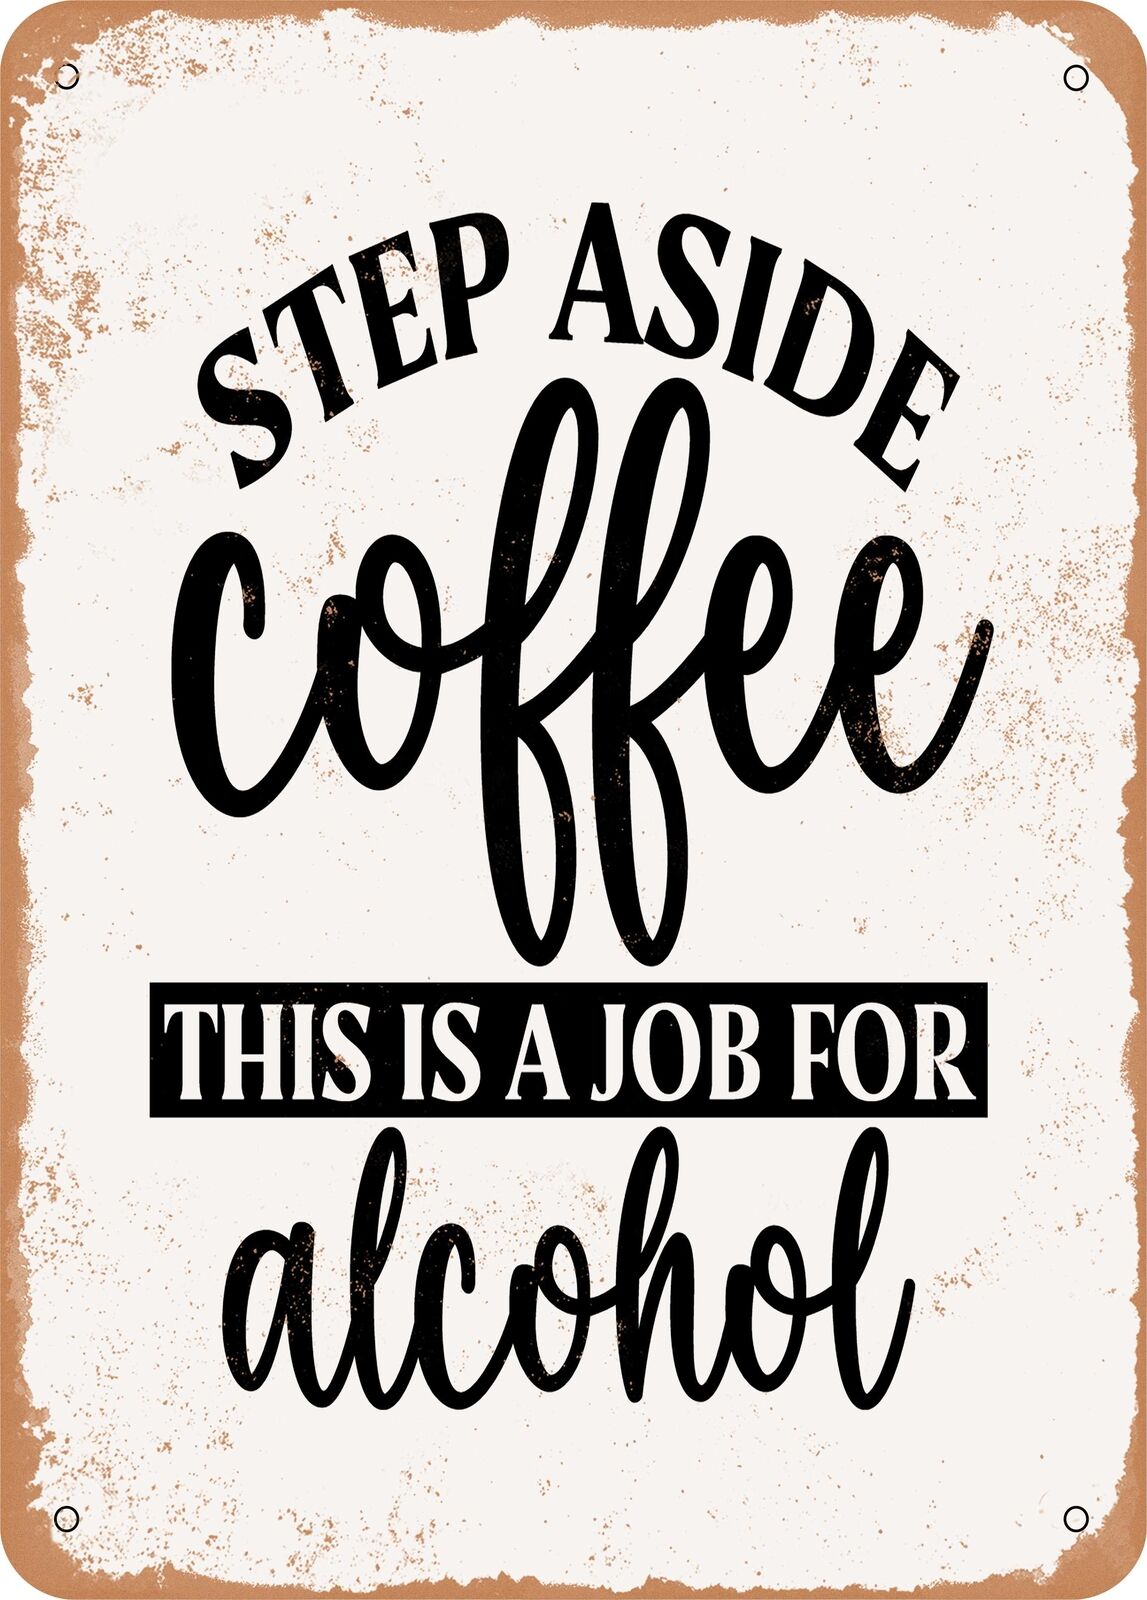 Metal Sign - Step Aside Coffee This is a Job For Alcohol - Vintage Rusty Look